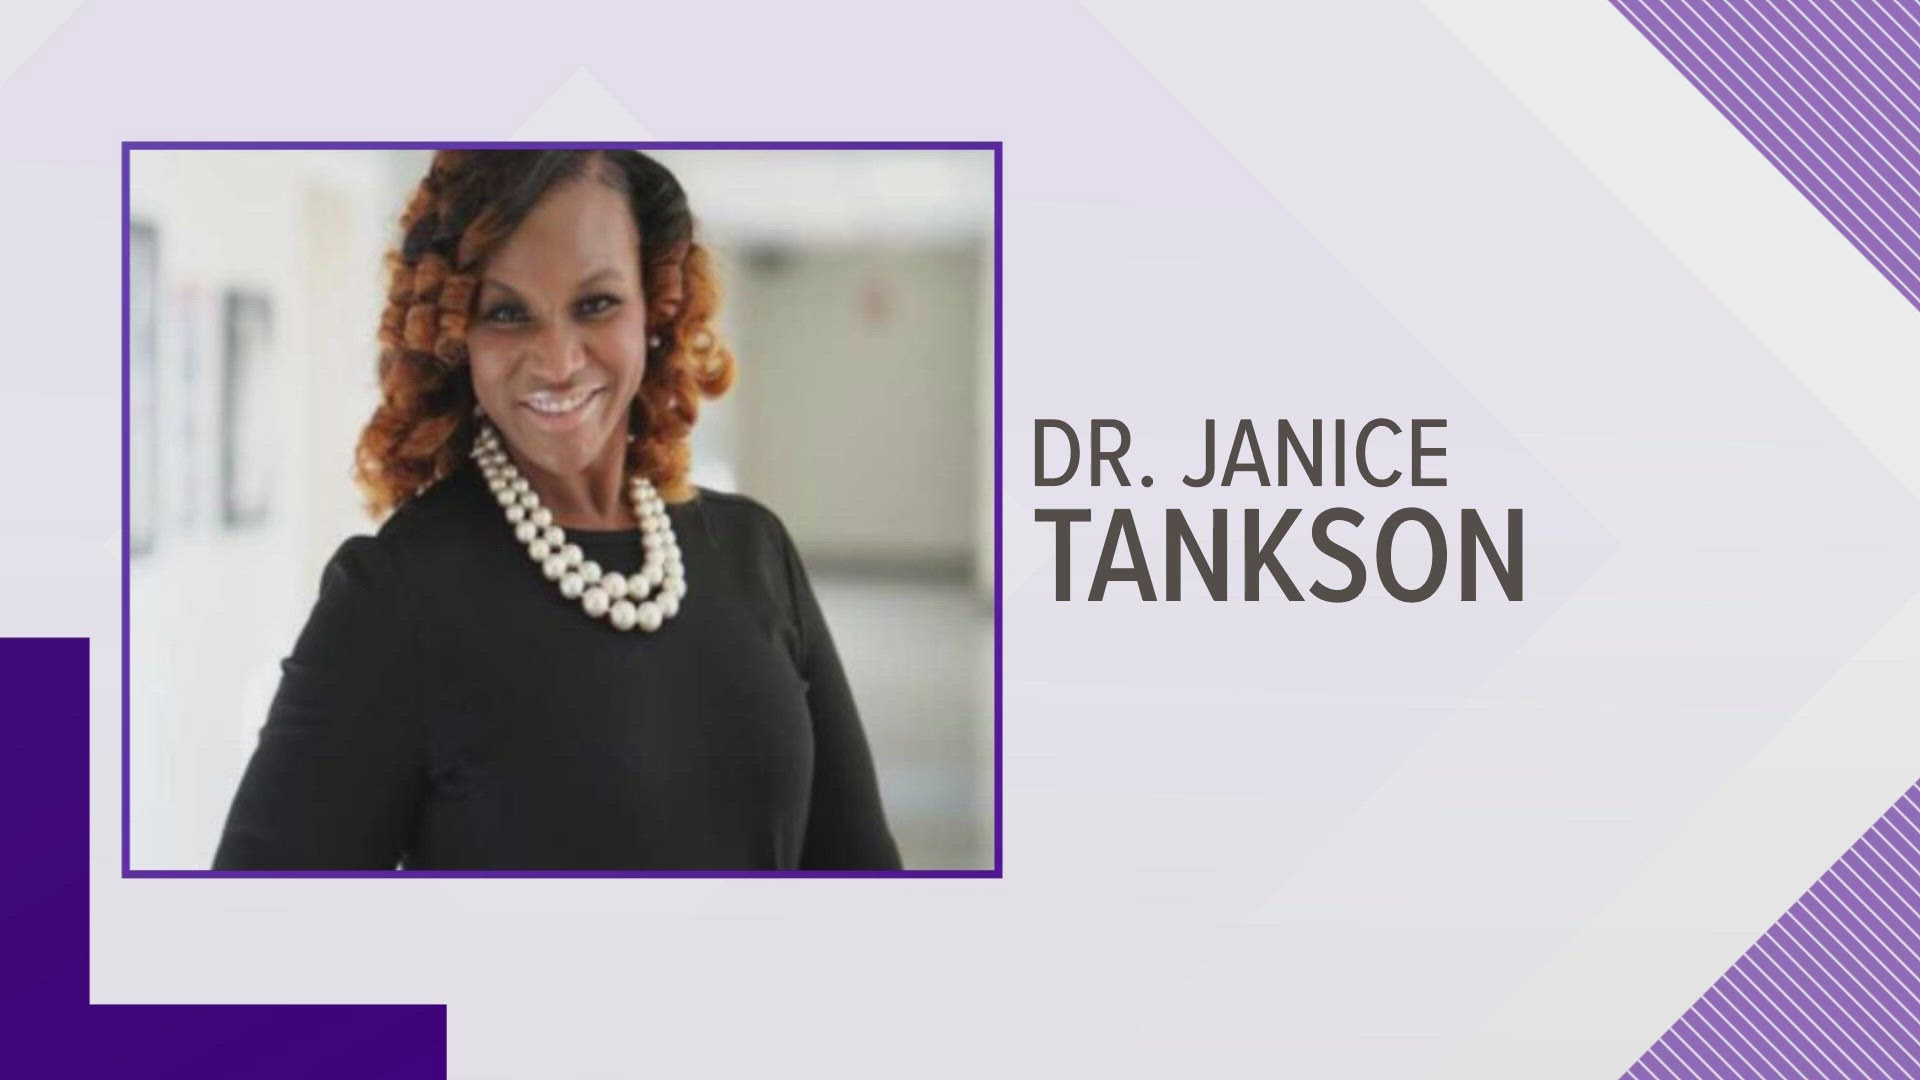 Dr. Janice Tankson served as the principal of two Memphis elementary schools from 2008 to 2019, when she became MSCS's instructional leadership director.